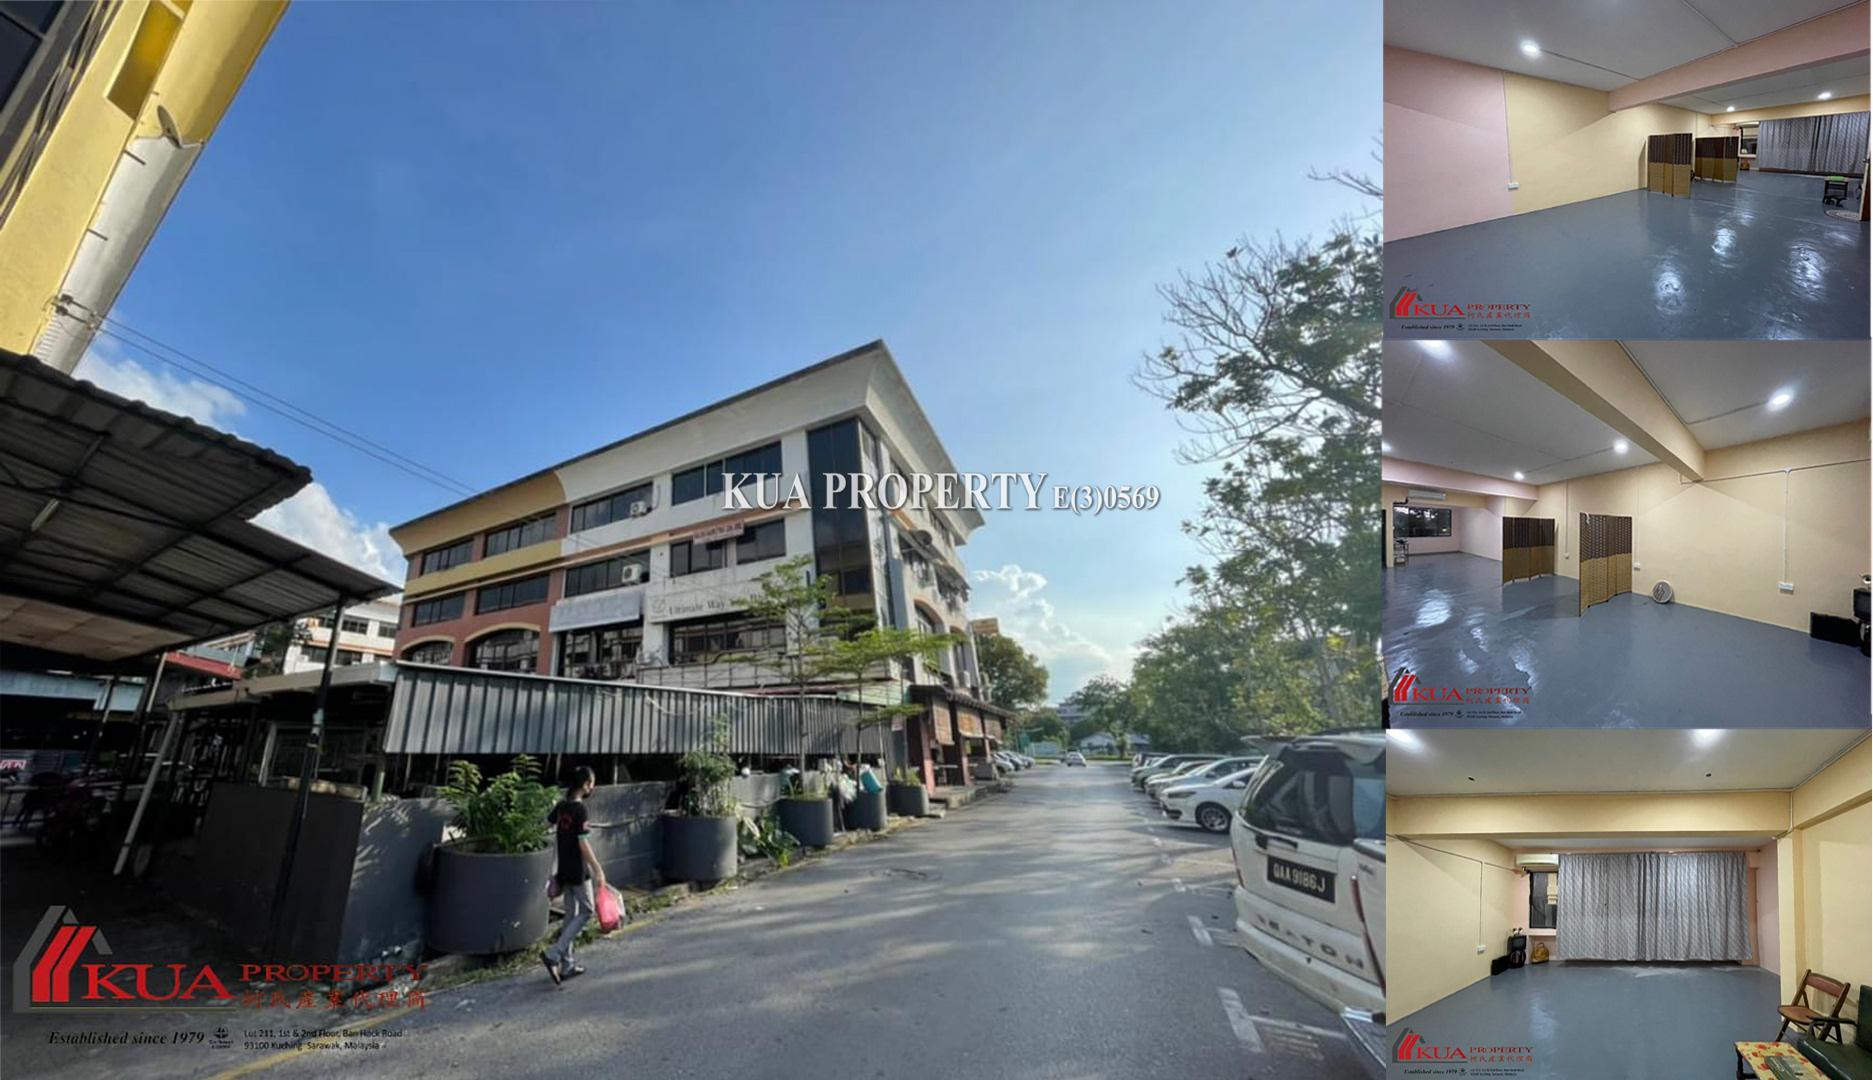 Second Floor Office/Shoplot For Rent! at 3rd Mile, Kuching